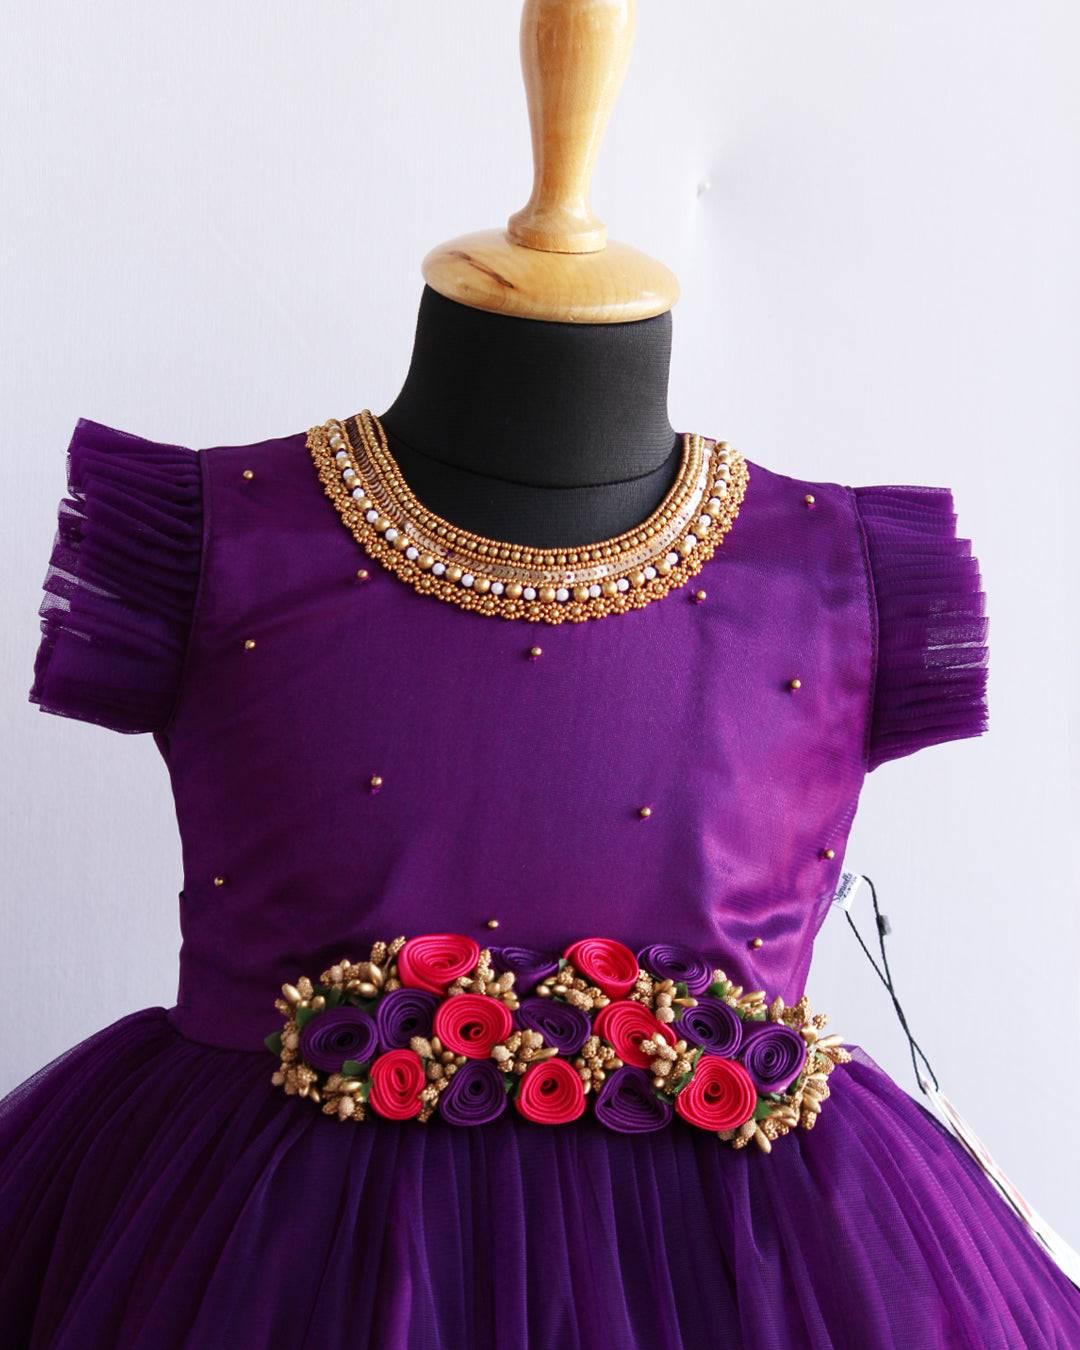 Purple shade Handwork Flower Frock
Material: Purple shade mono nylon net fabric with premium glossy satin as lining. Inner portion is covered with premium ultra satin and white cotton lining.

Colour